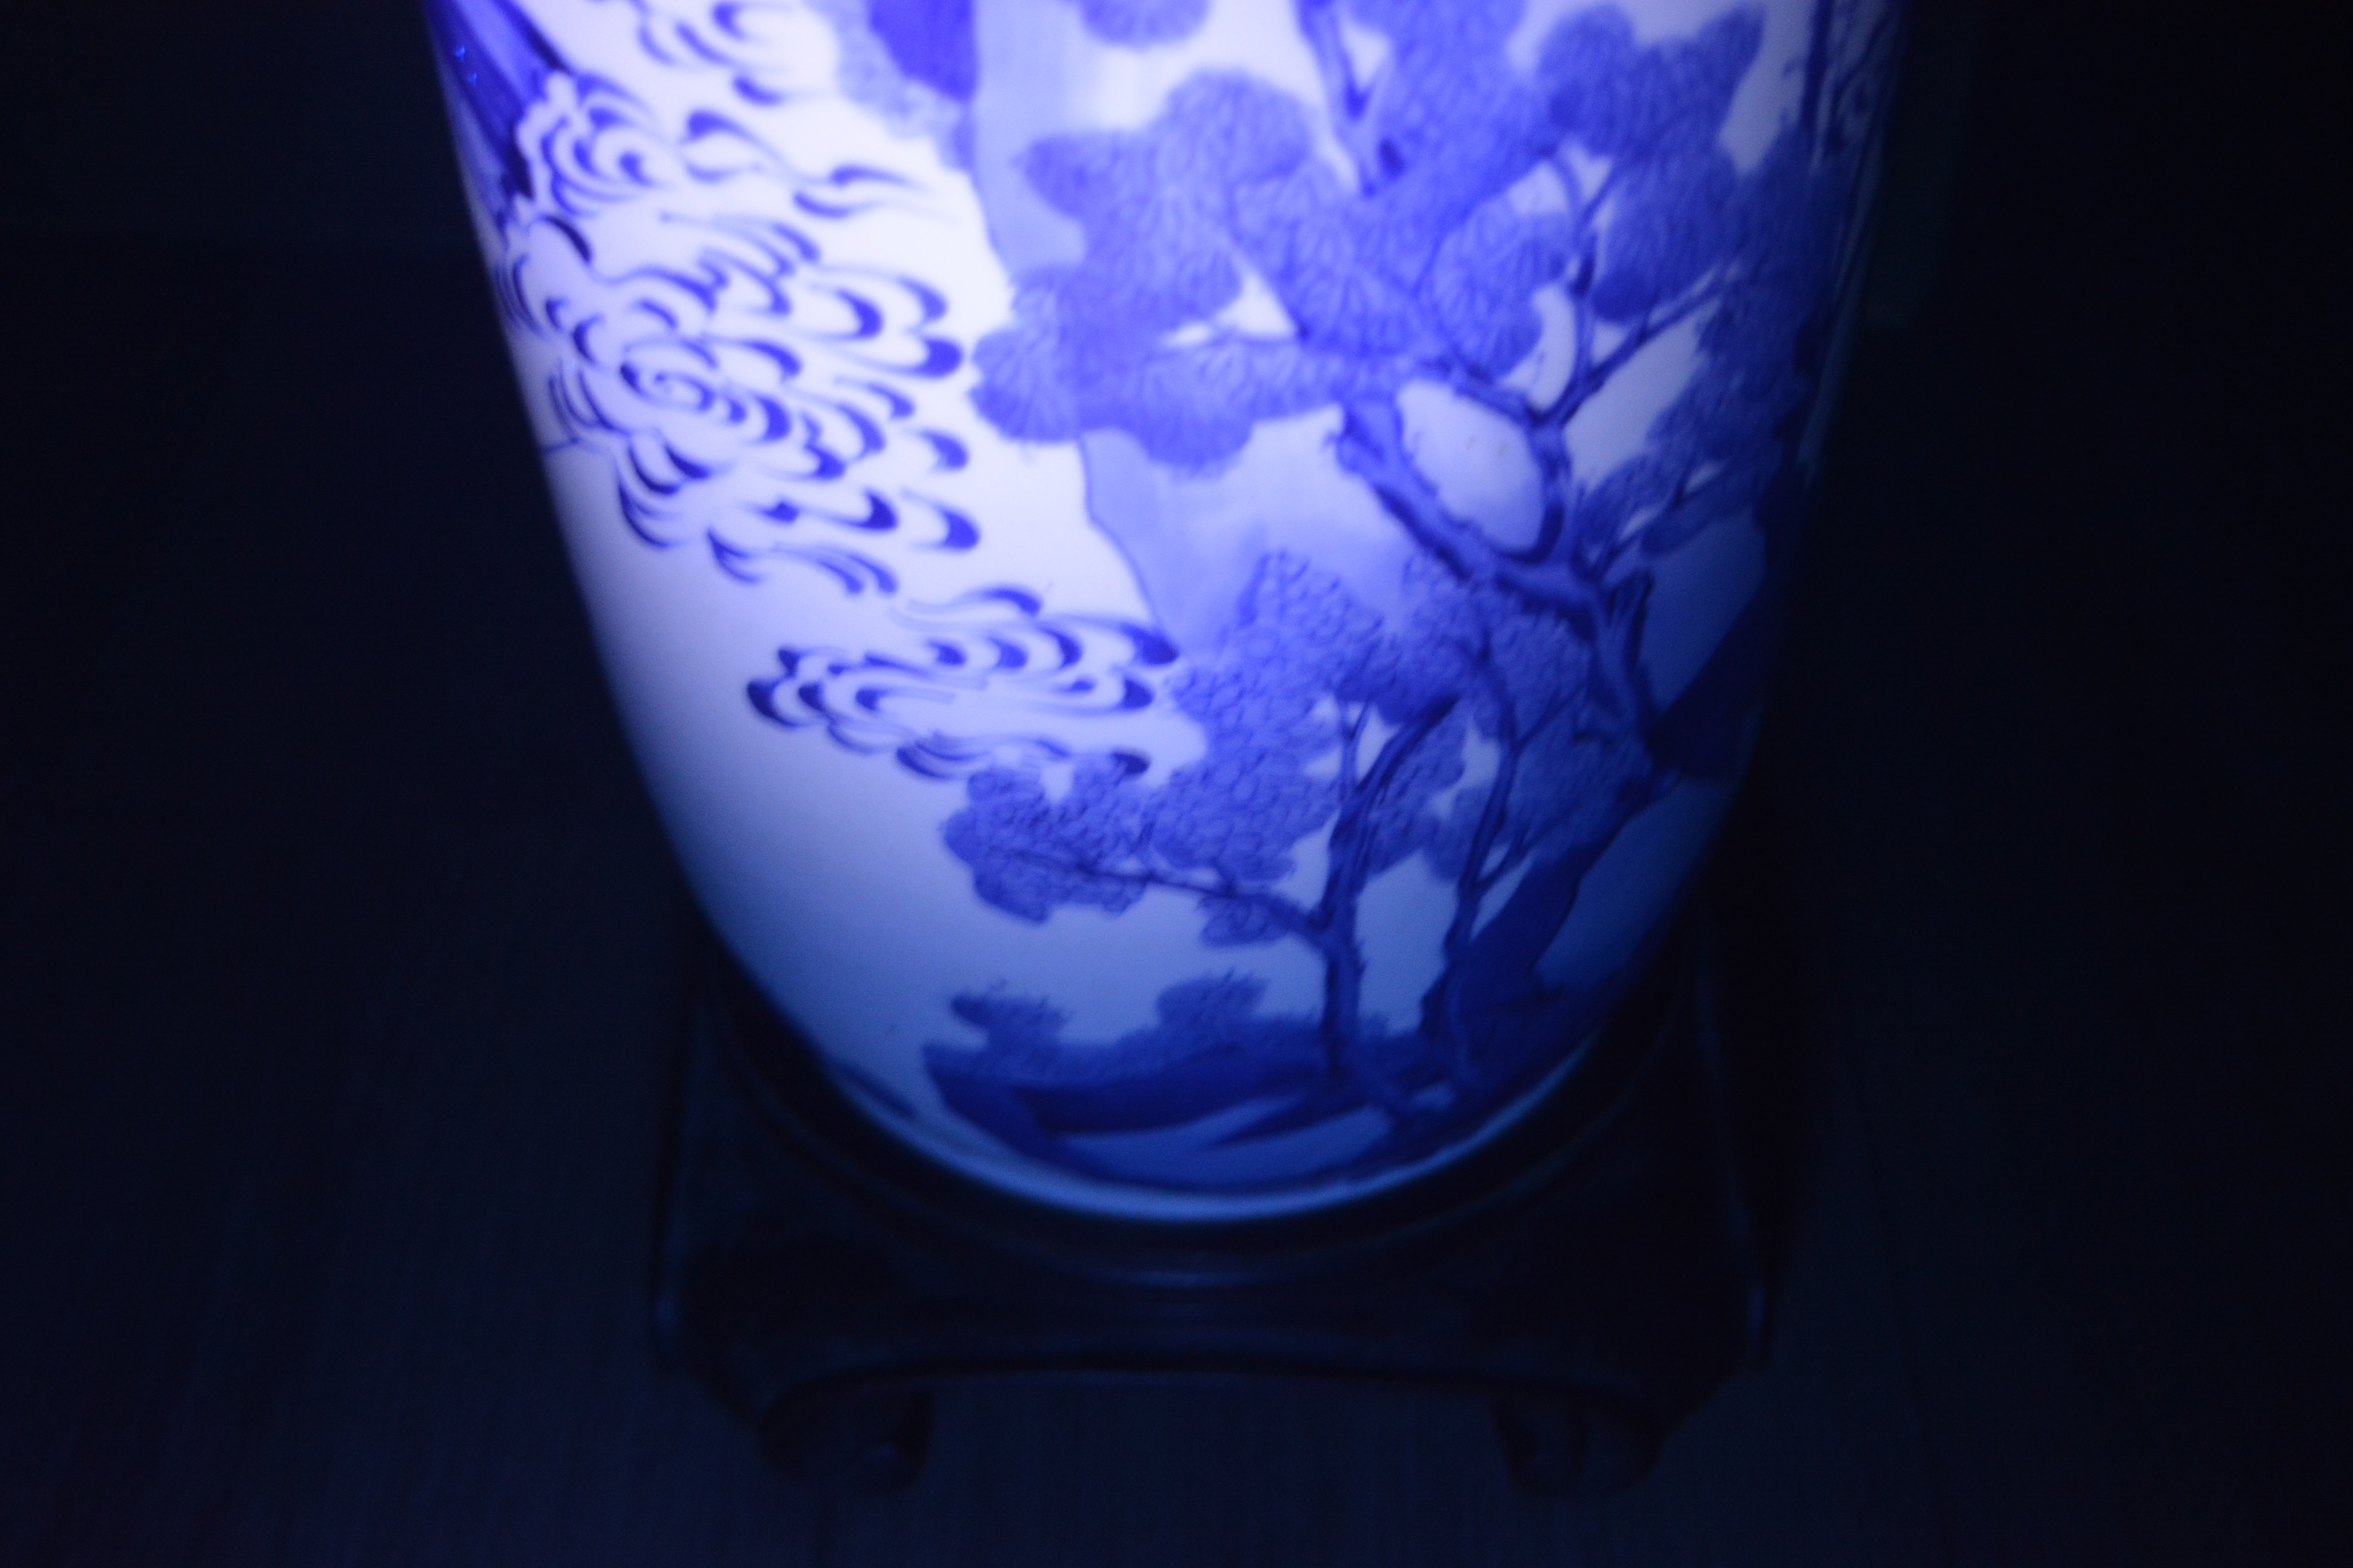 Blue and white porcelain rouleau vase Chinese, Kangxi painted with scholars, clouds, and figures - Image 30 of 33